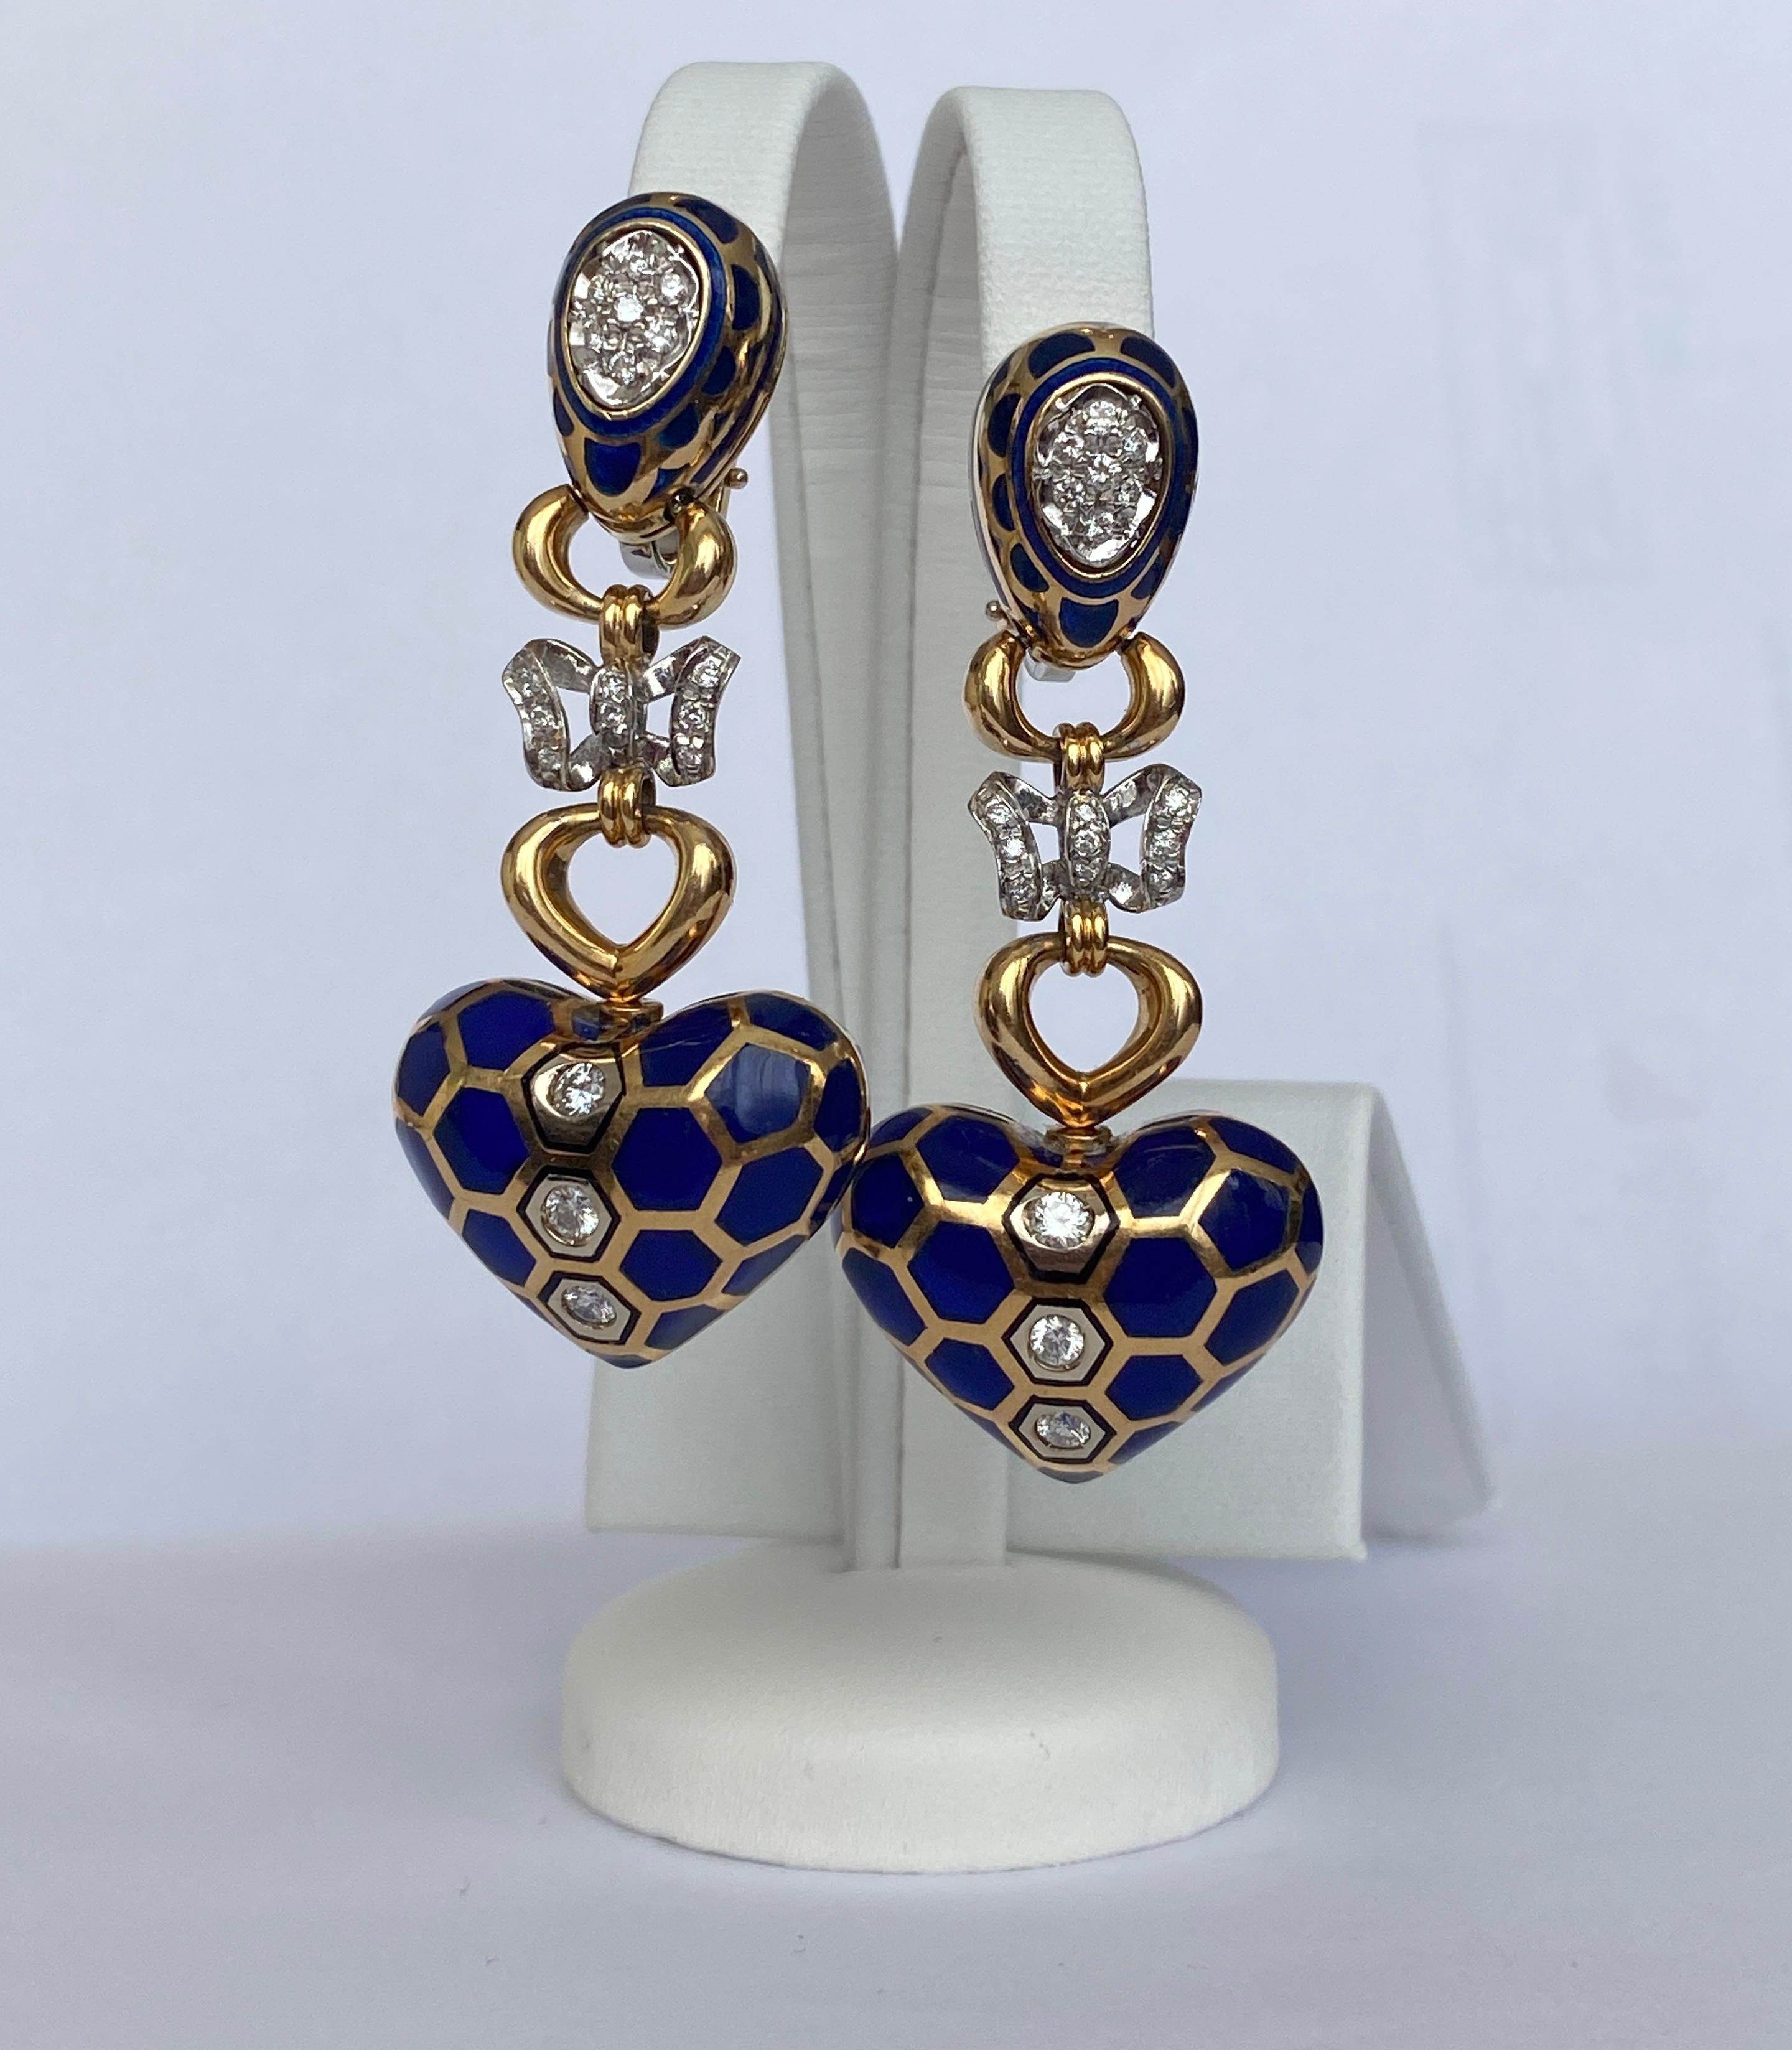 Offered are beautiful 18 kt gold and enamel long earrings. A unique property! Enamel is particularly striking because of the play of the colors, a blue with gold. The earrings are decorated with 38 brilliant cut diamonds, approx. 1.40 ct, of quality